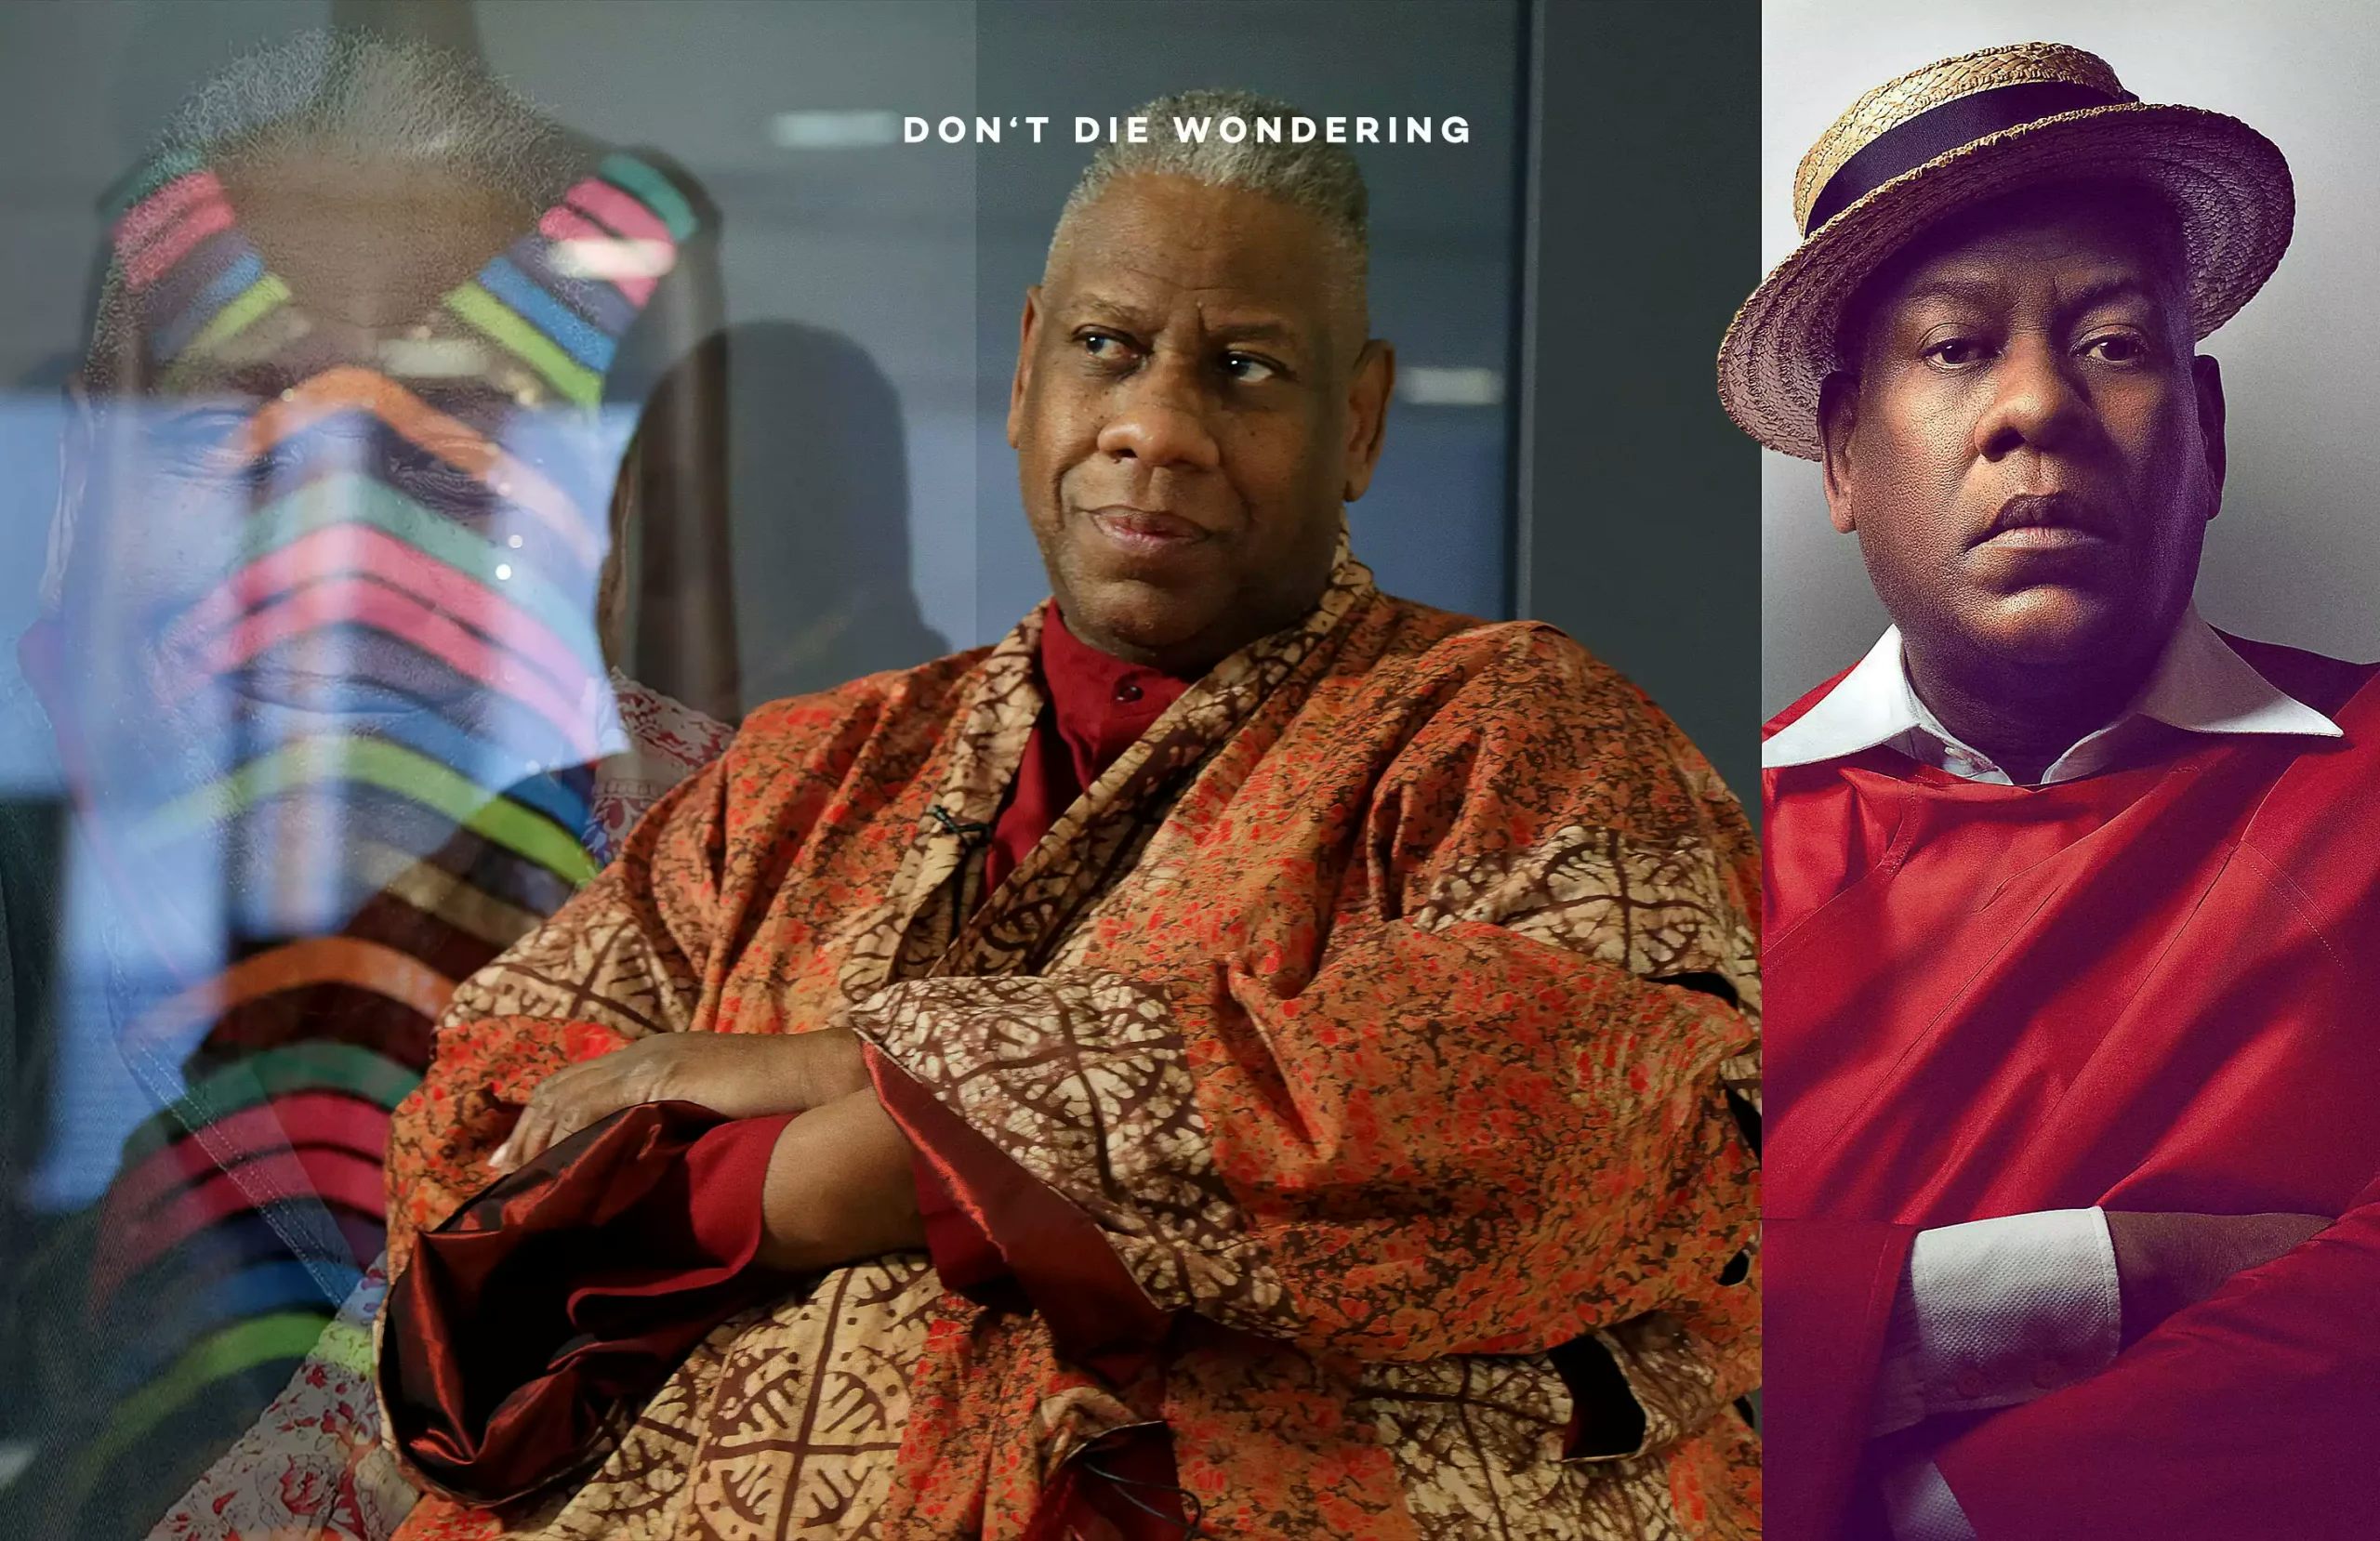 André Leon Talley, Legendary Fashion Journalist, Has Died At Age 73